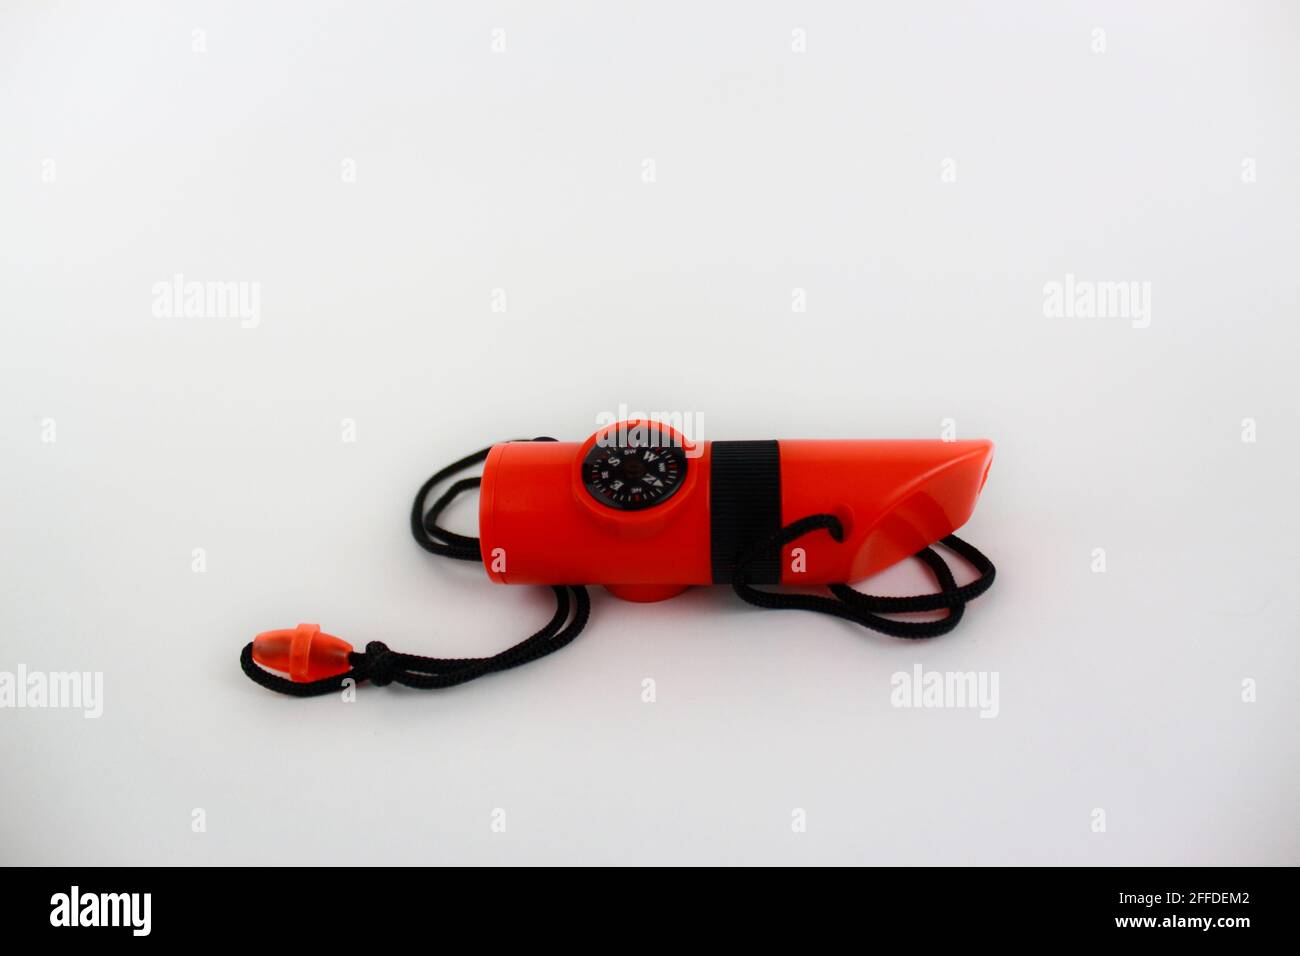 A rescue device isolated on white background Stock Photo